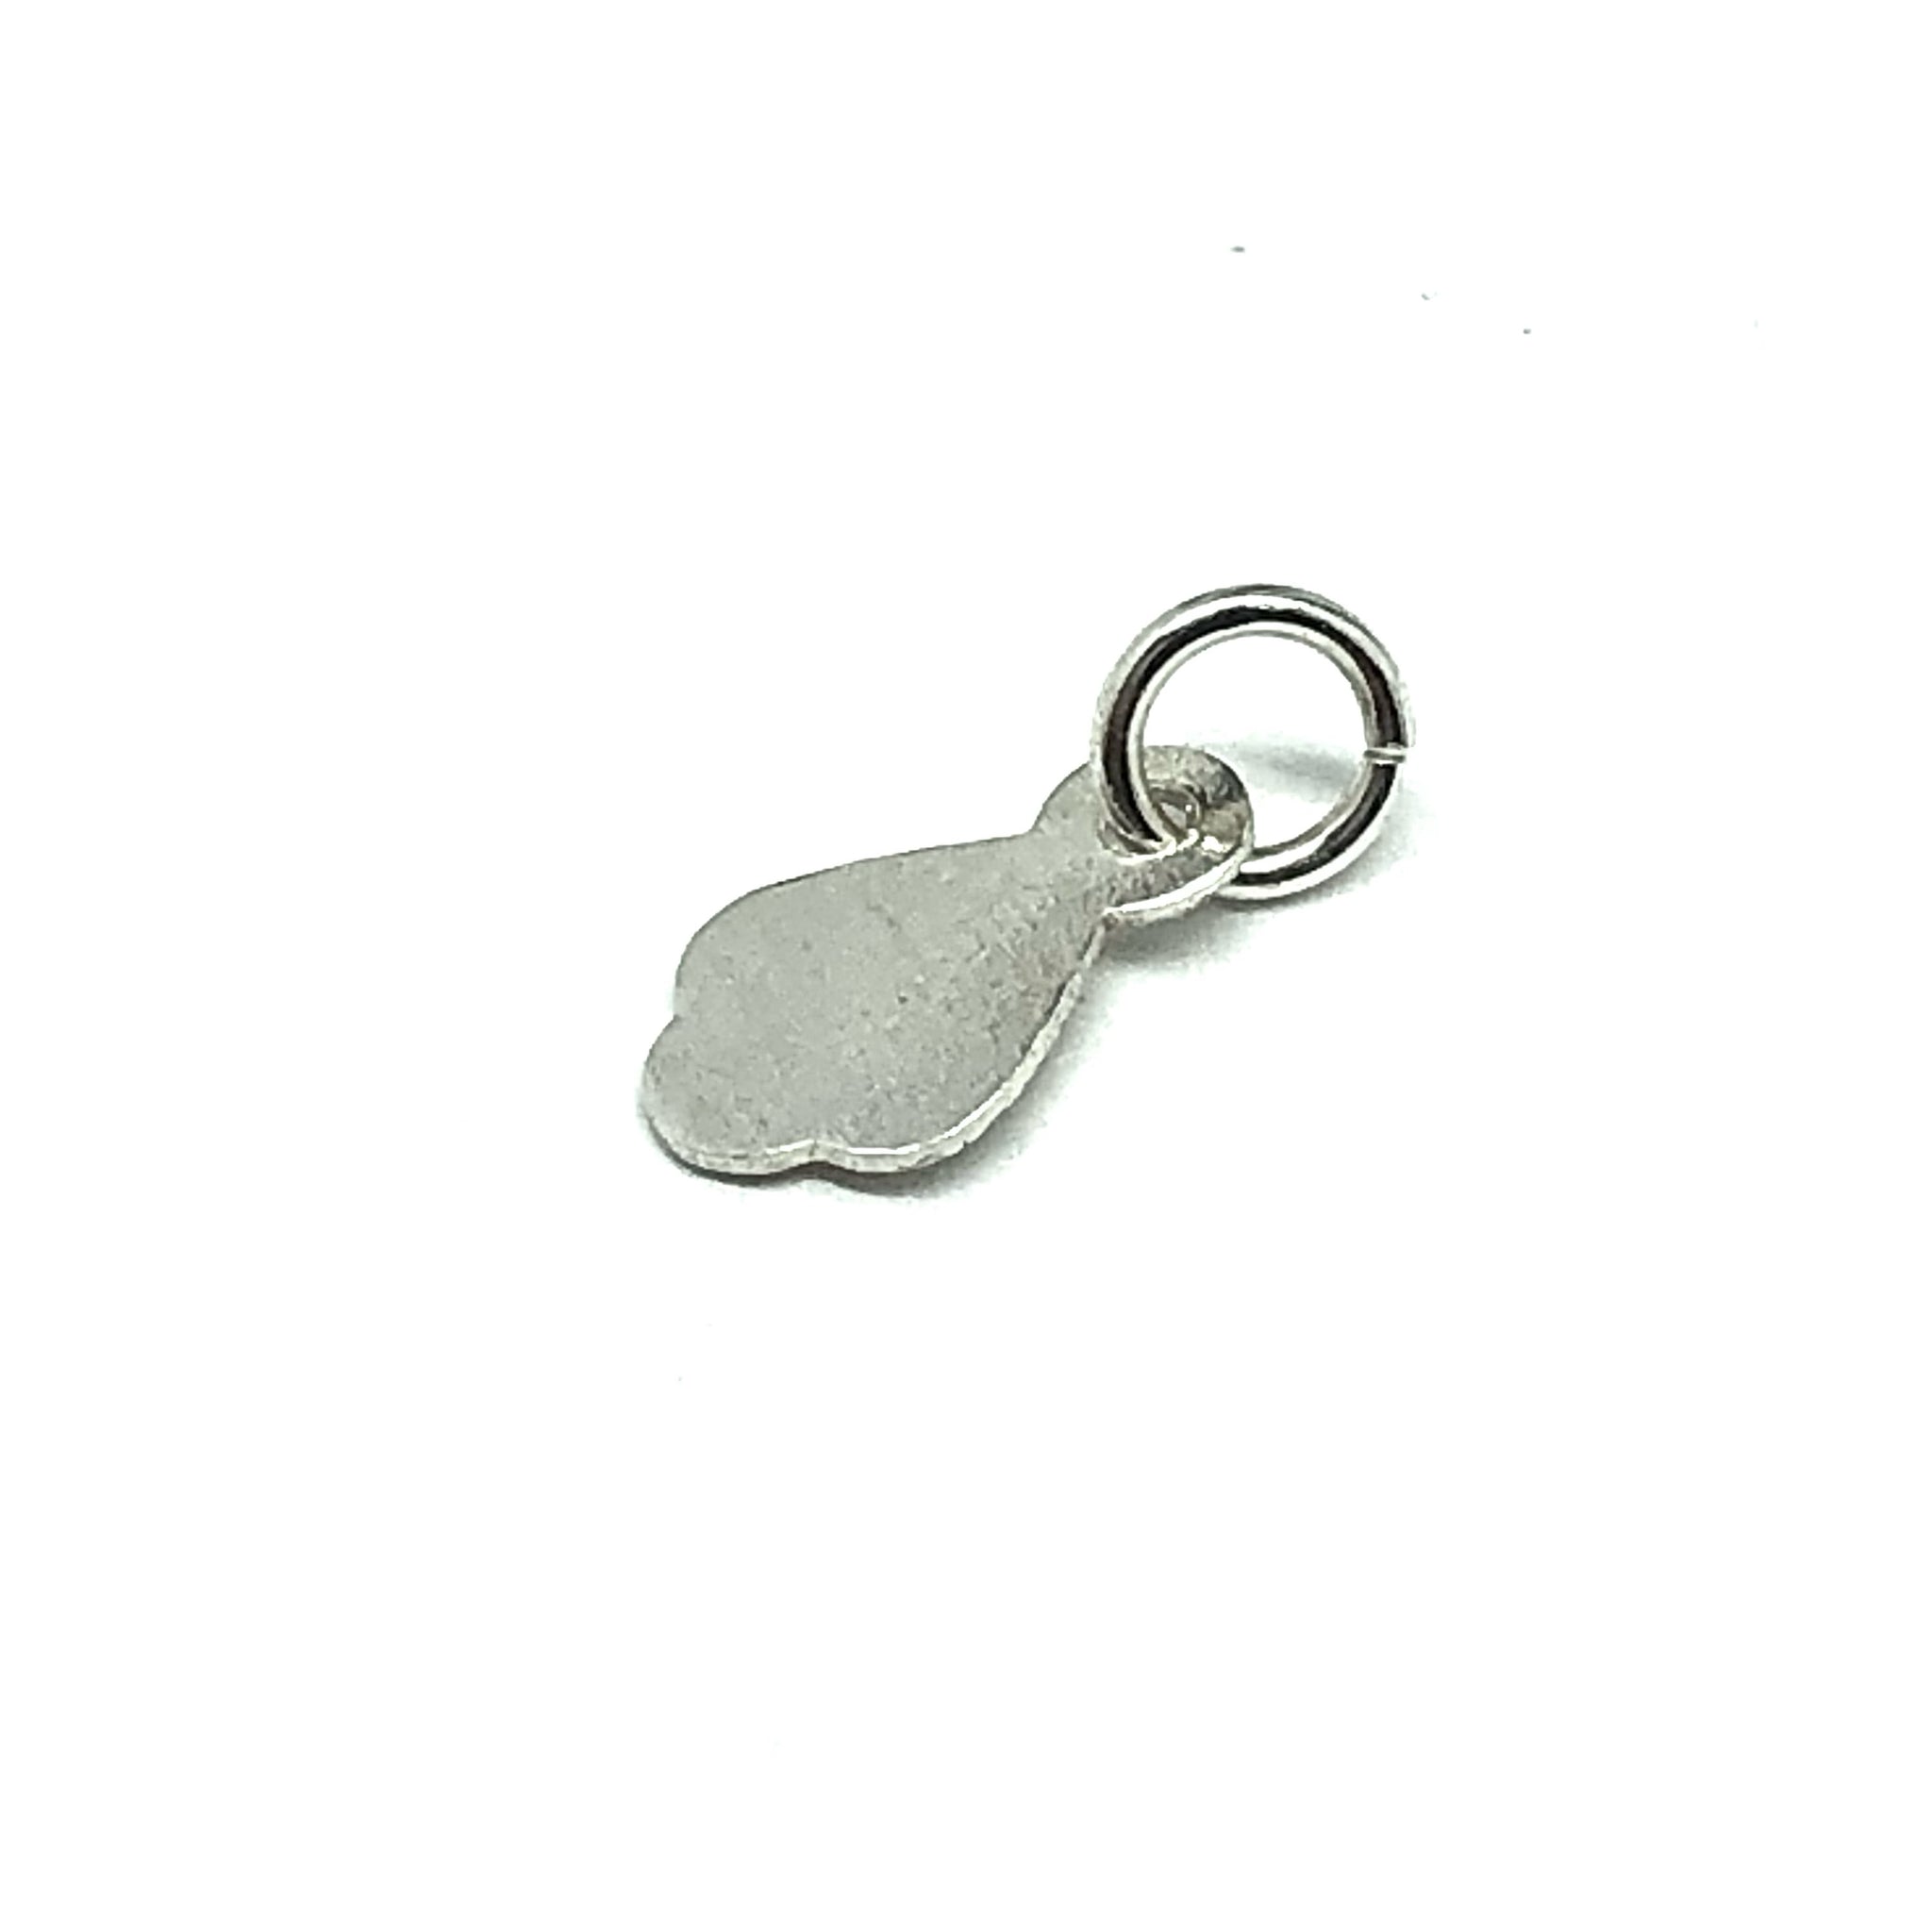 Zipper Pull Repair Charm - Rustic Graphite Heart Zipper Charm for Repair /  Decorative anything it can clip onto! – Blingschlingers Jewelry